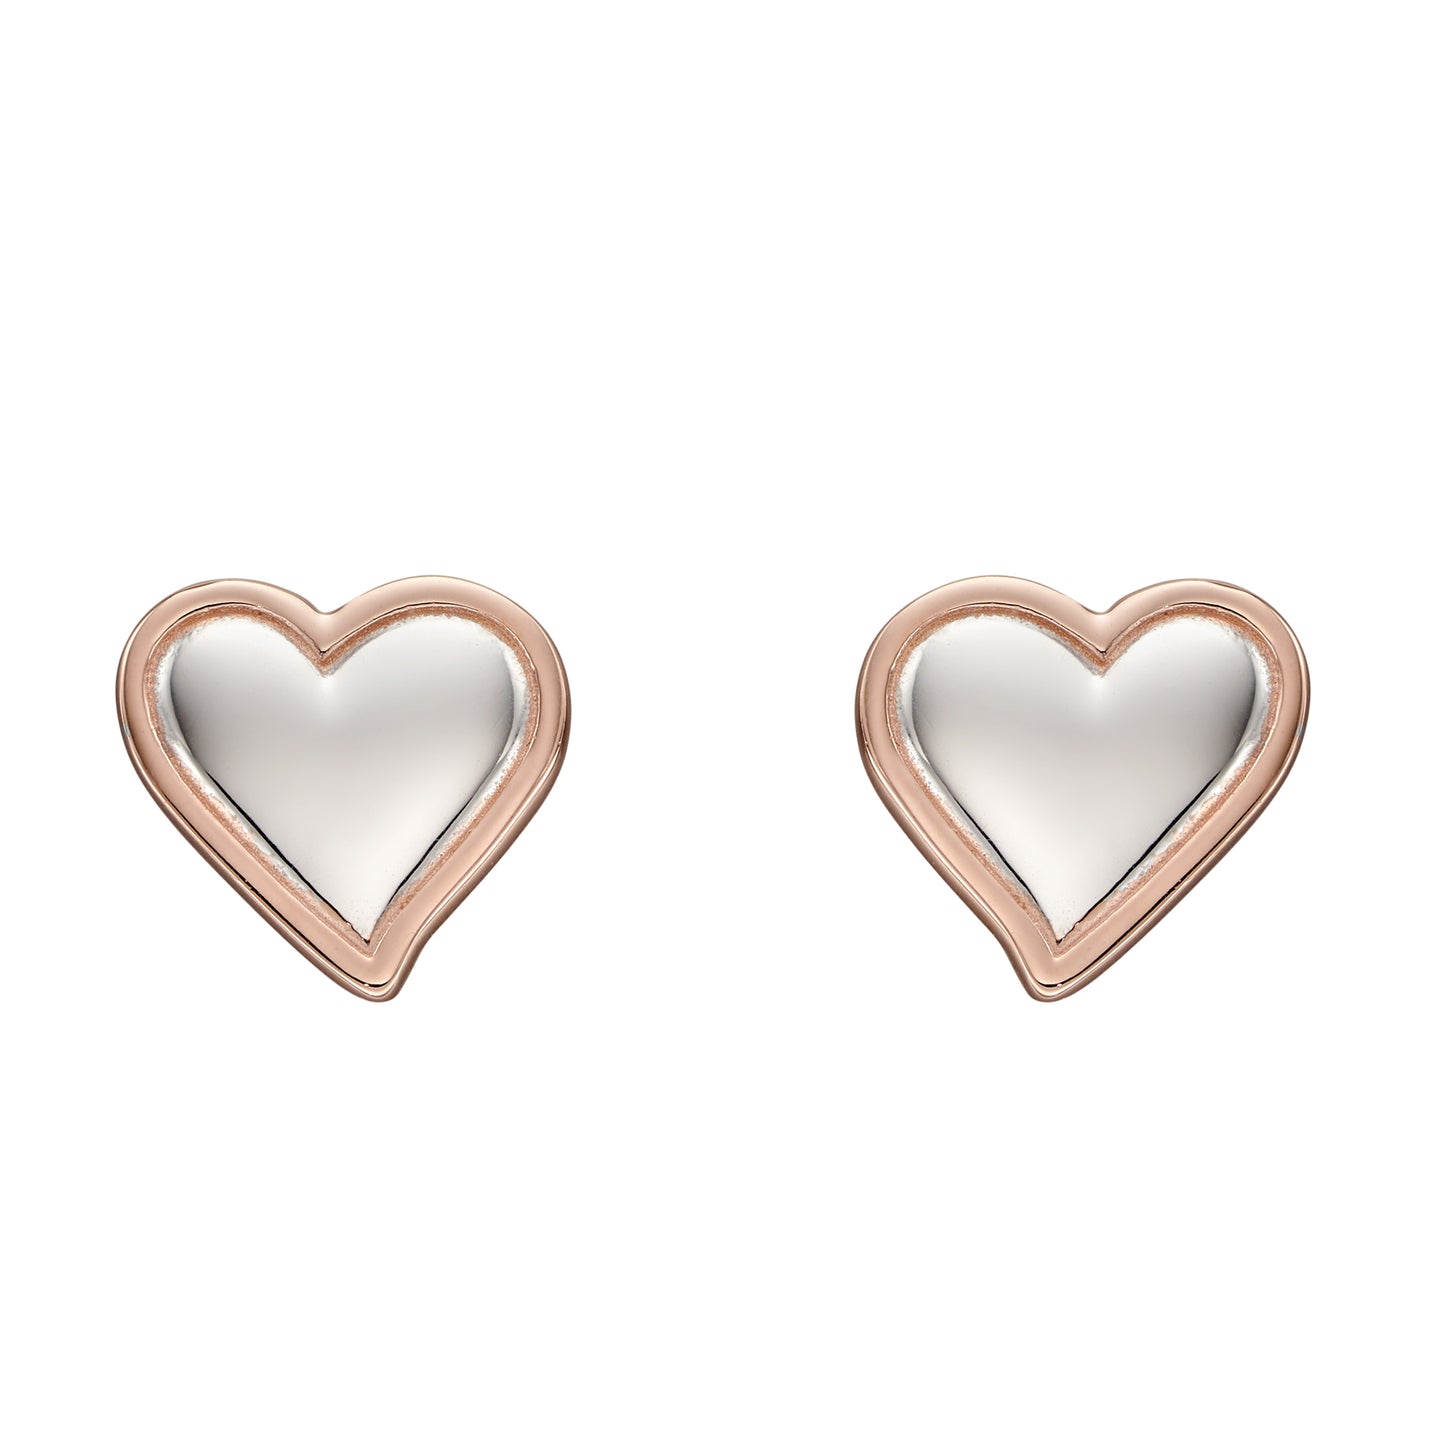 Silver and Rose Gold plated Detail Heart Shaped Stud Earrings